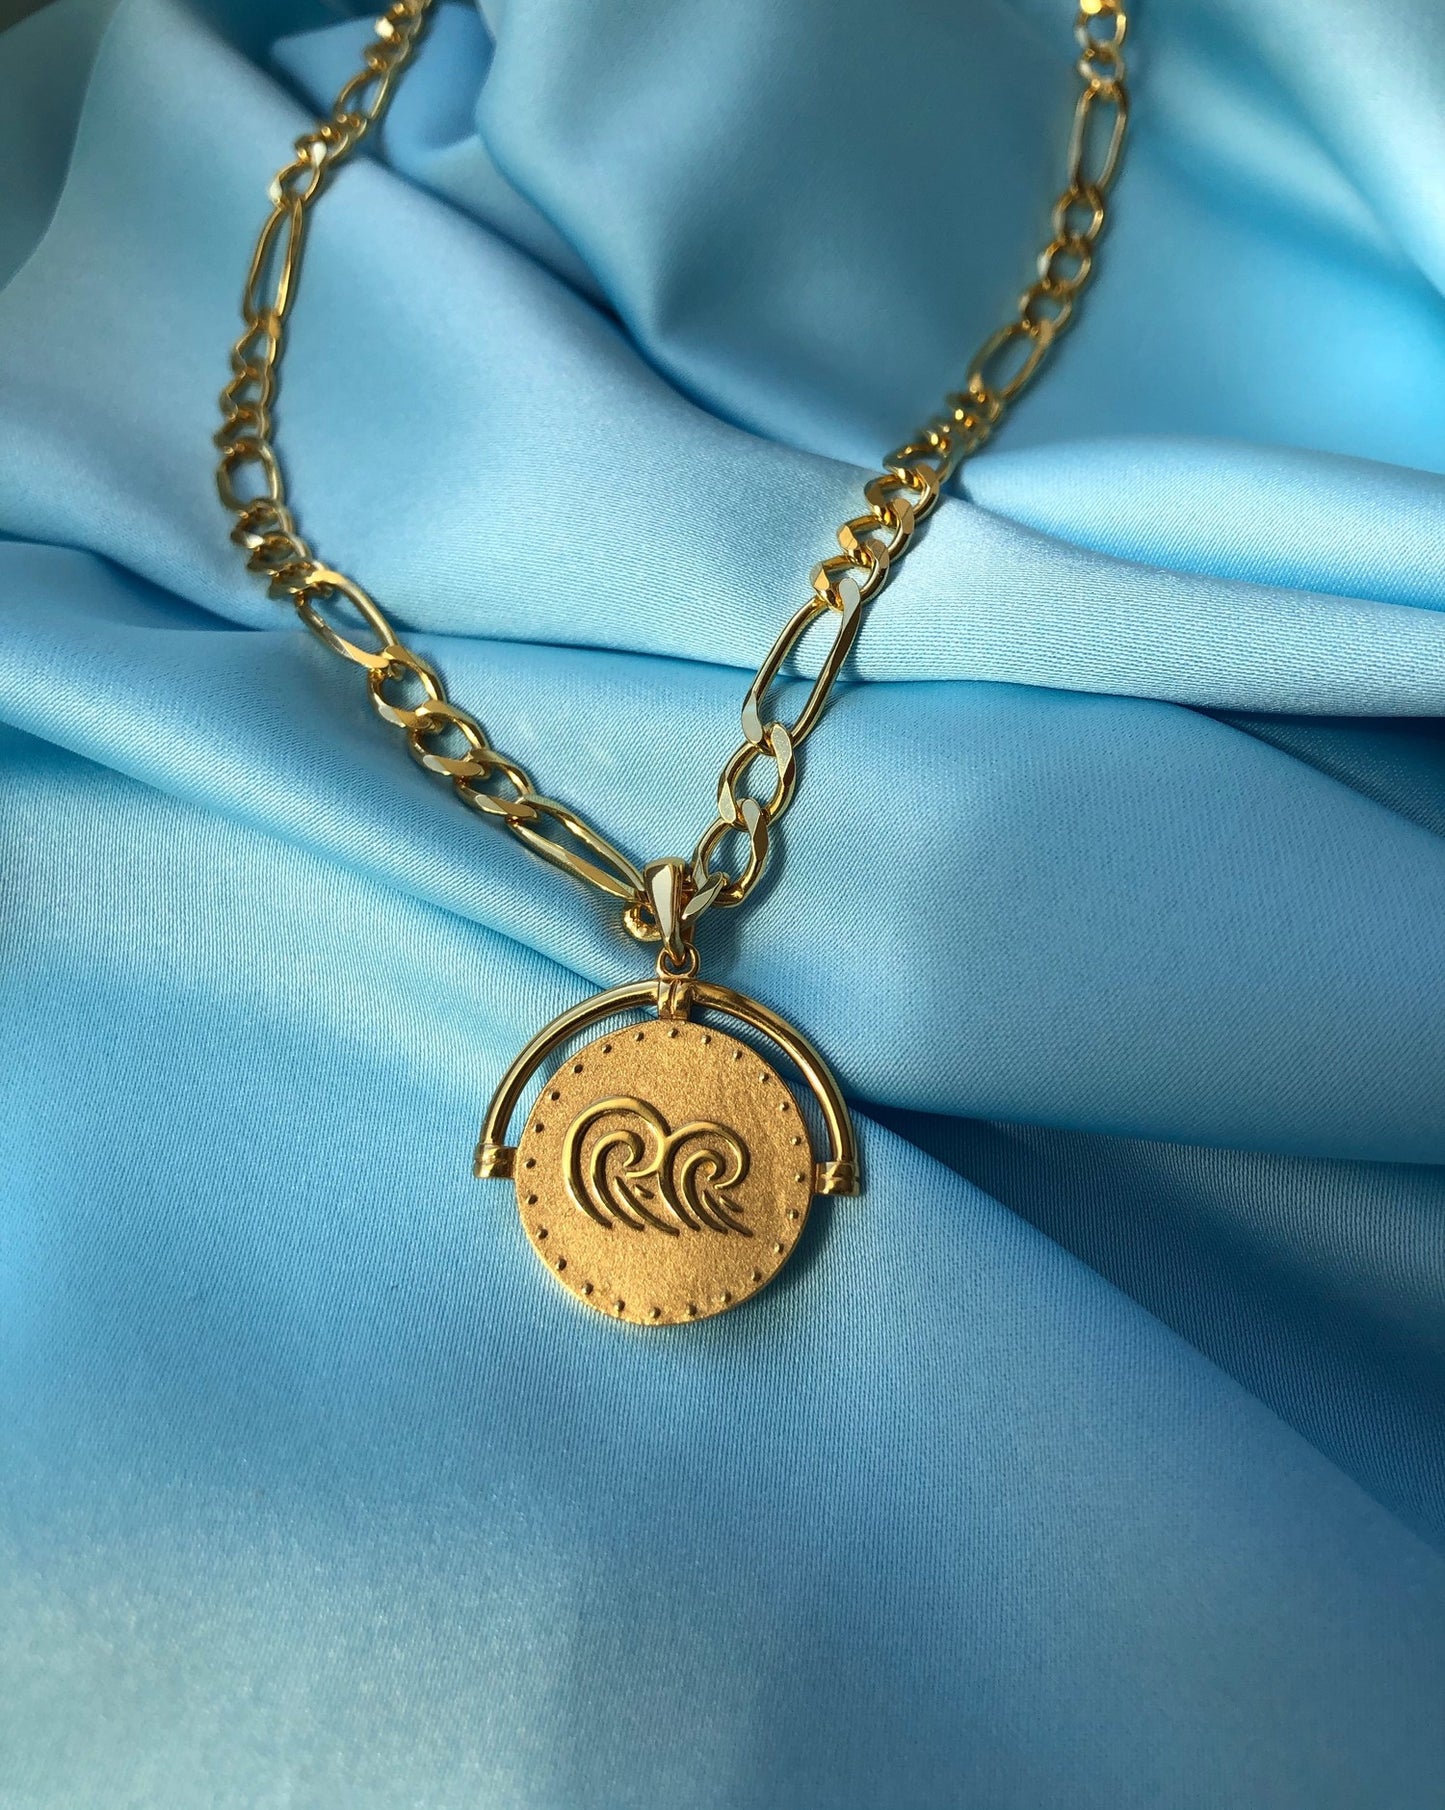 The Waves pendant